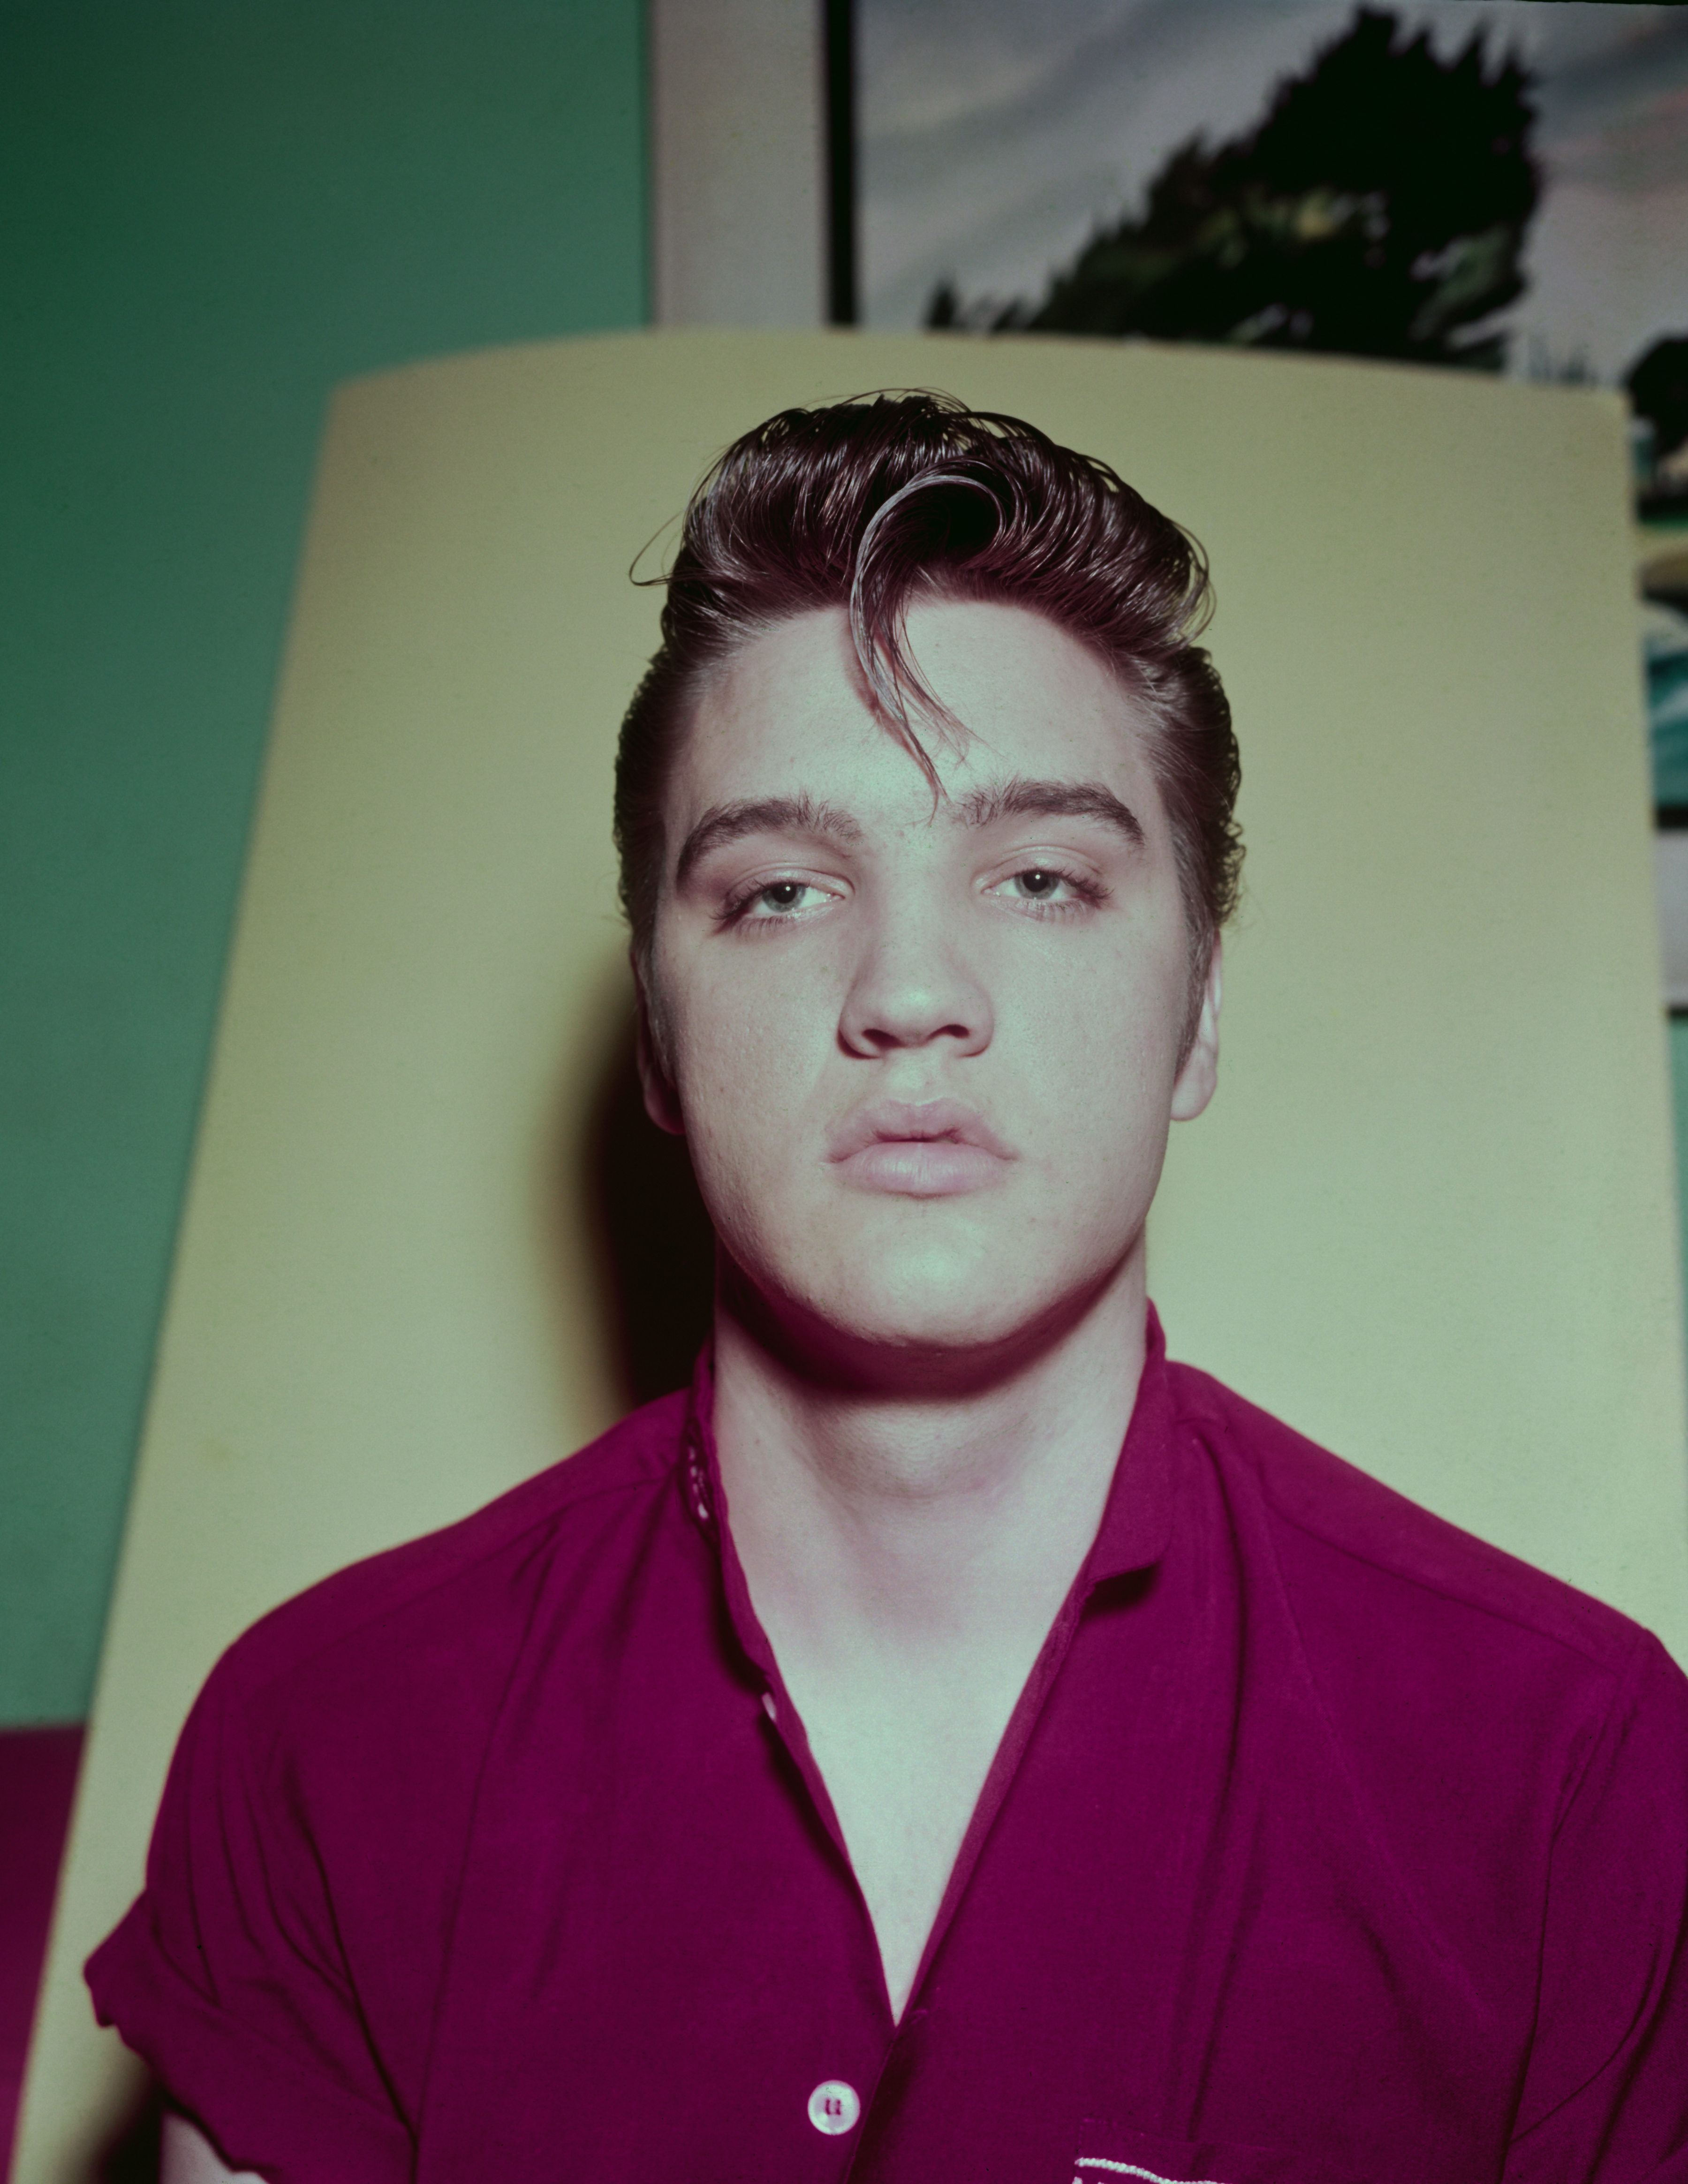 American singer and actor Elvis Presley, circa 1957. | Source: Getty Images